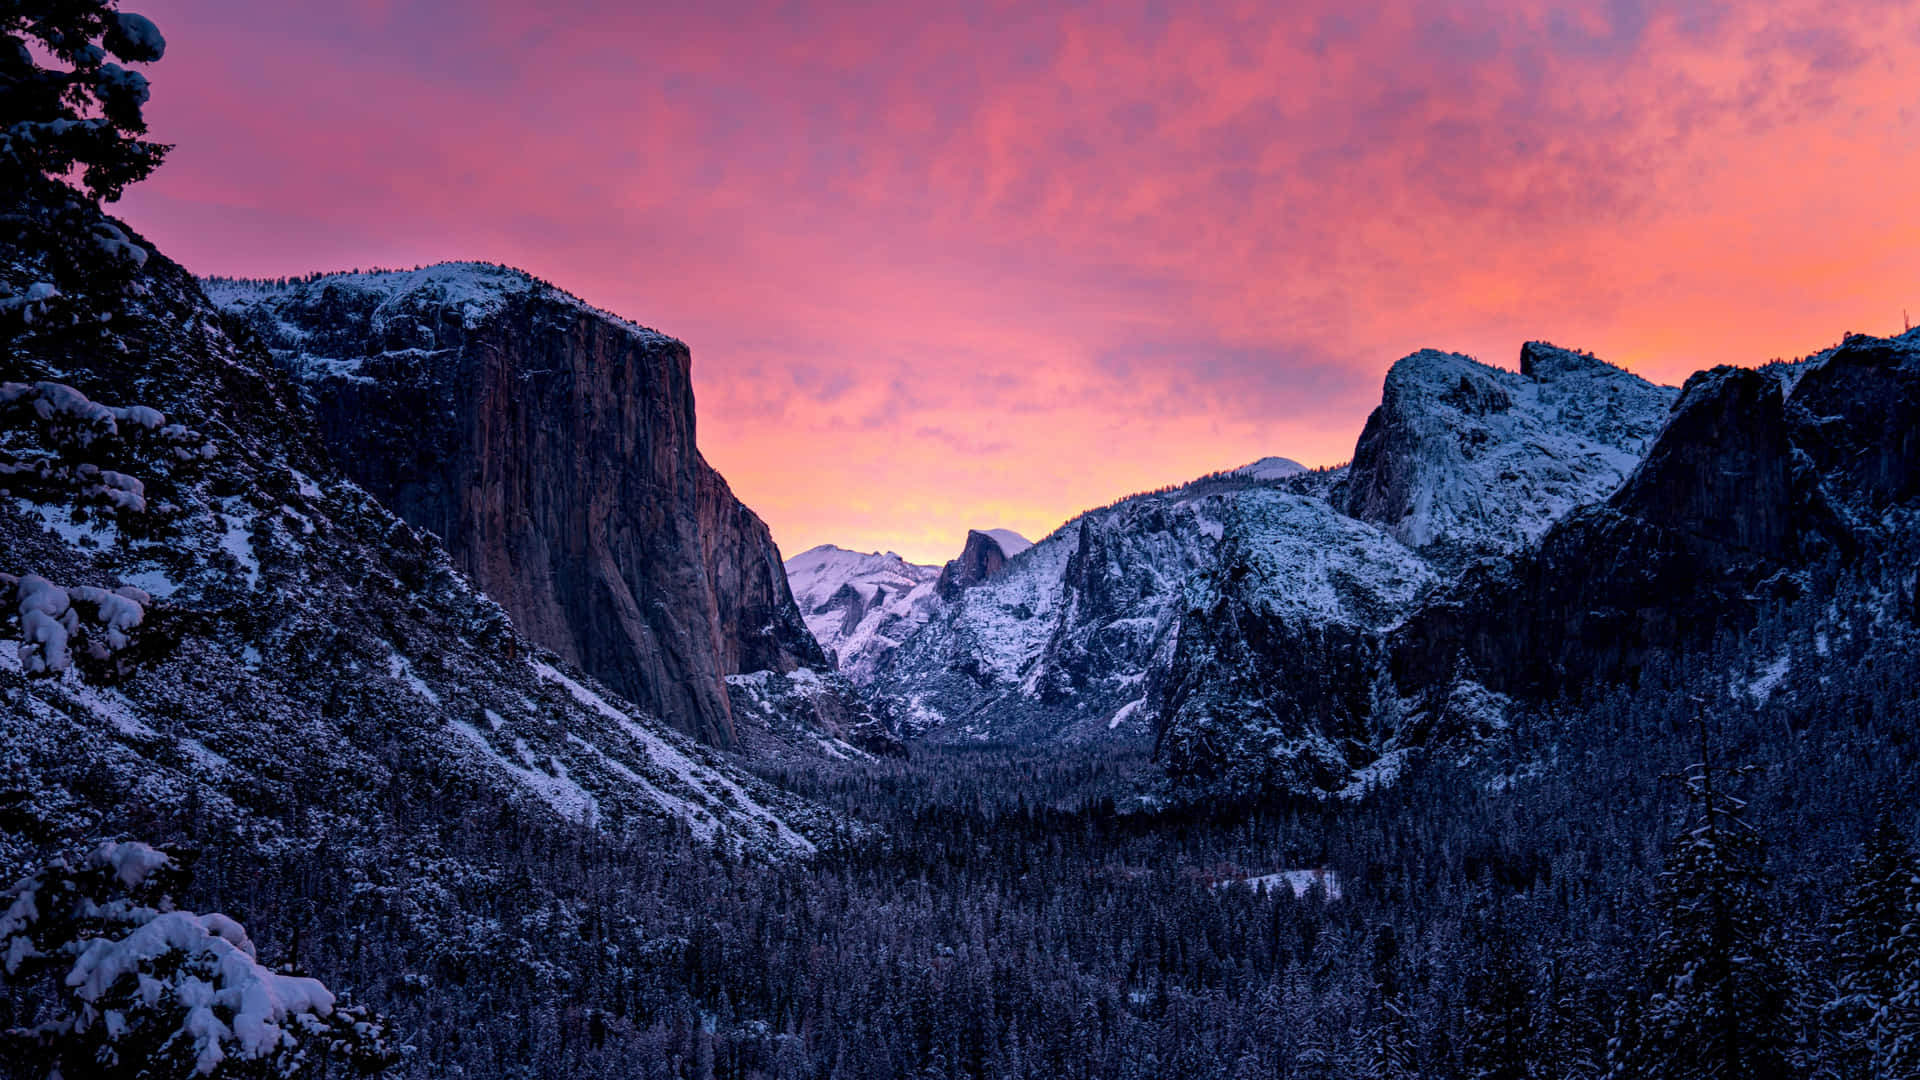 "Sunset in the Mountains of California" Wallpaper